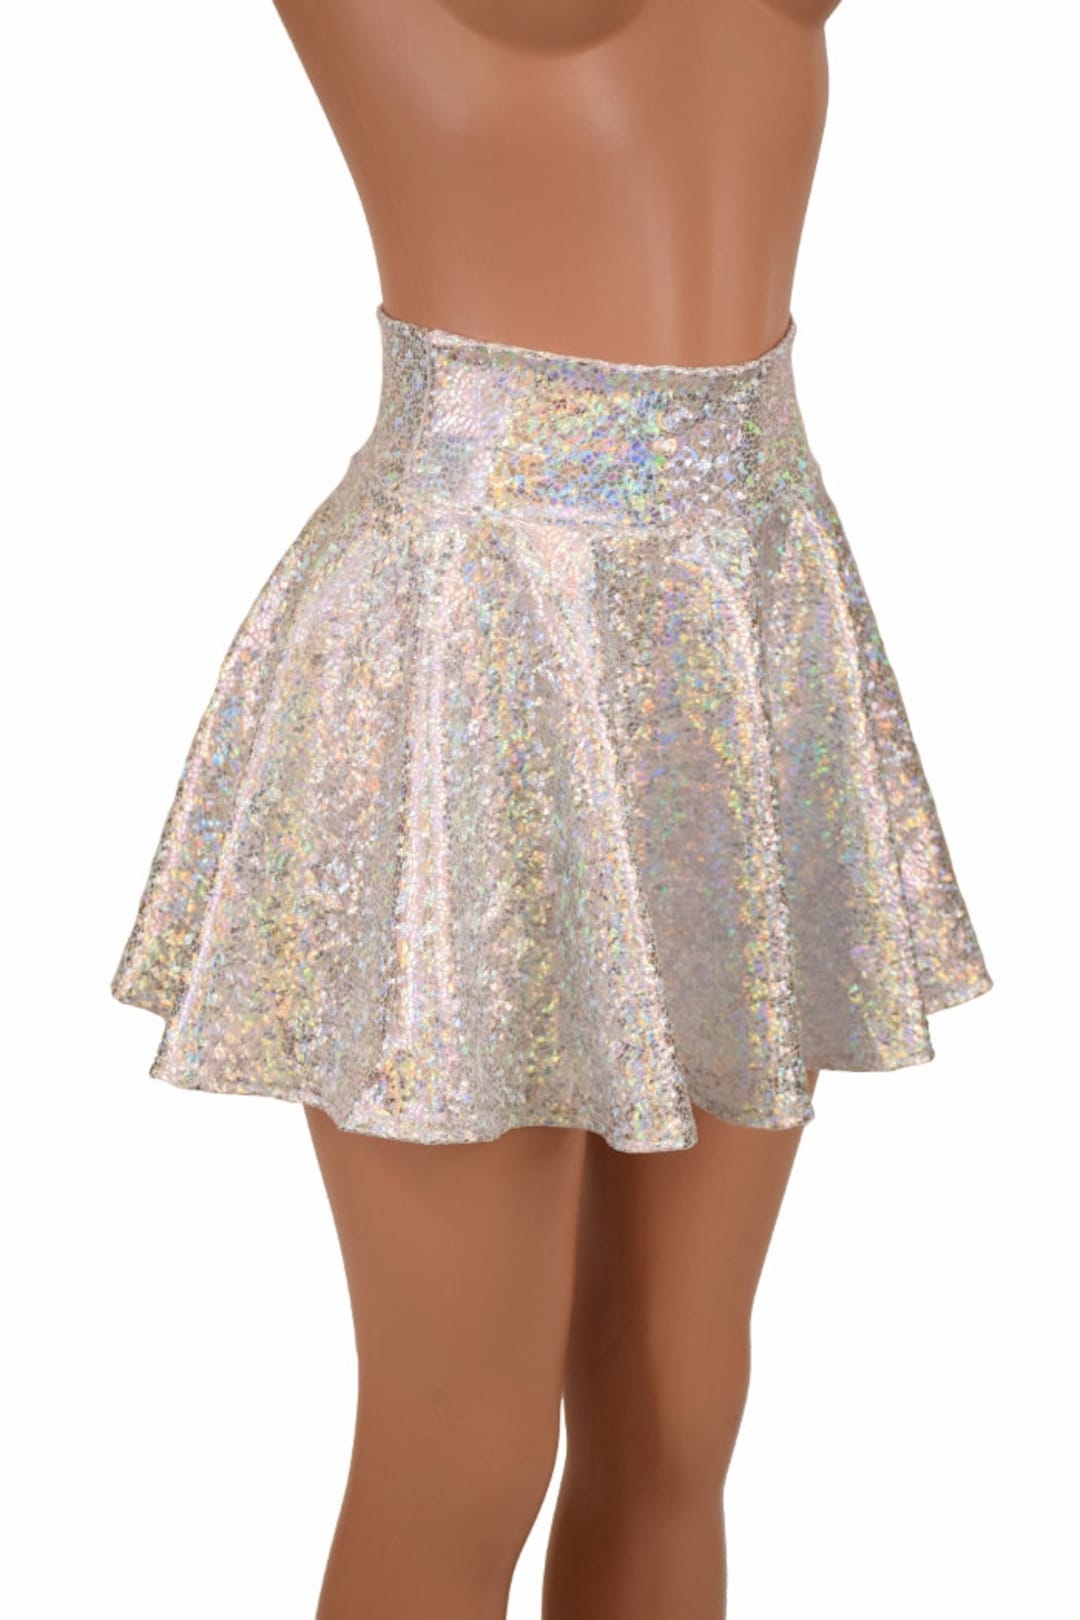 Silver on White Shattered Glass Holographic Circle Cut Mini Skirt ...